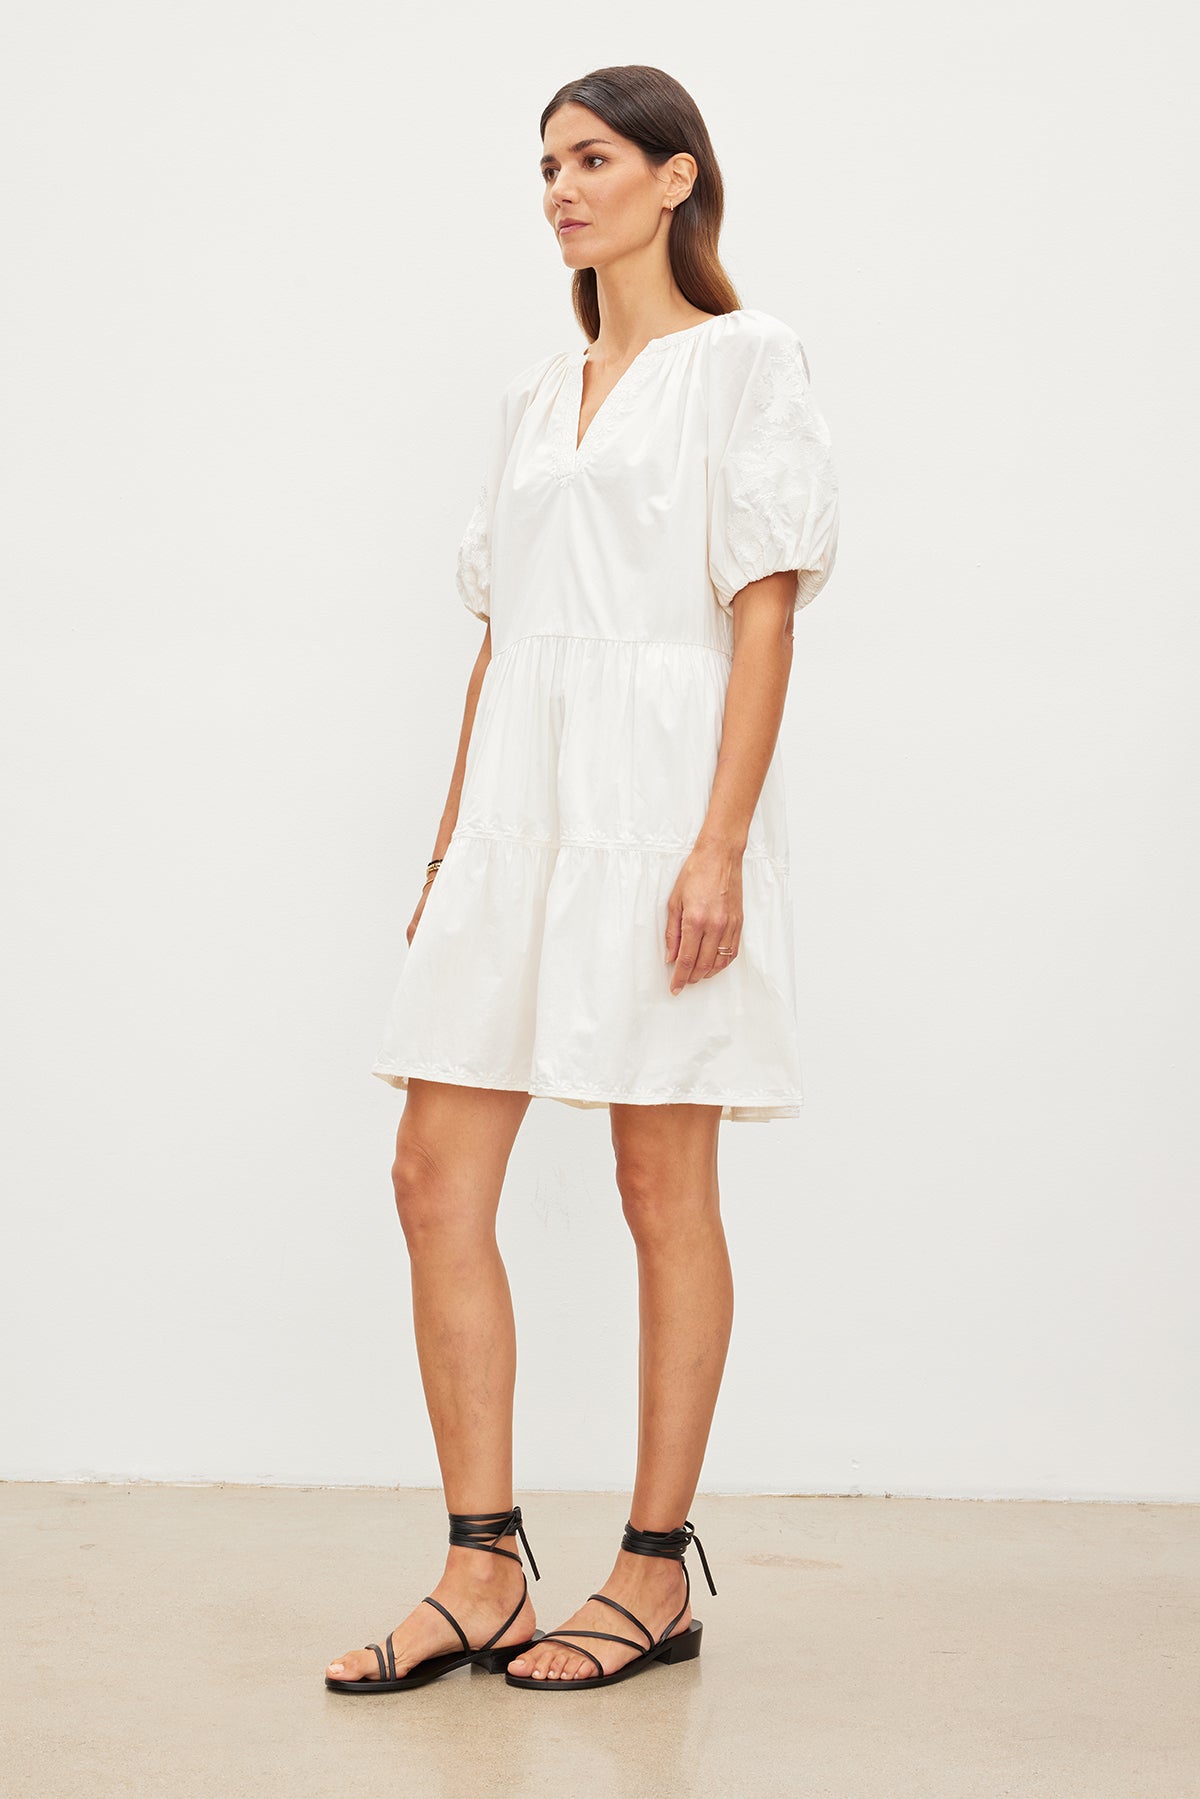 A woman stands in a plain room, wearing a short white cotton CHRISSY EMBROIDERED BOHO DRESS and black strappy sandals from Velvet by Graham & Spencer, looking to the side.-35955557499073